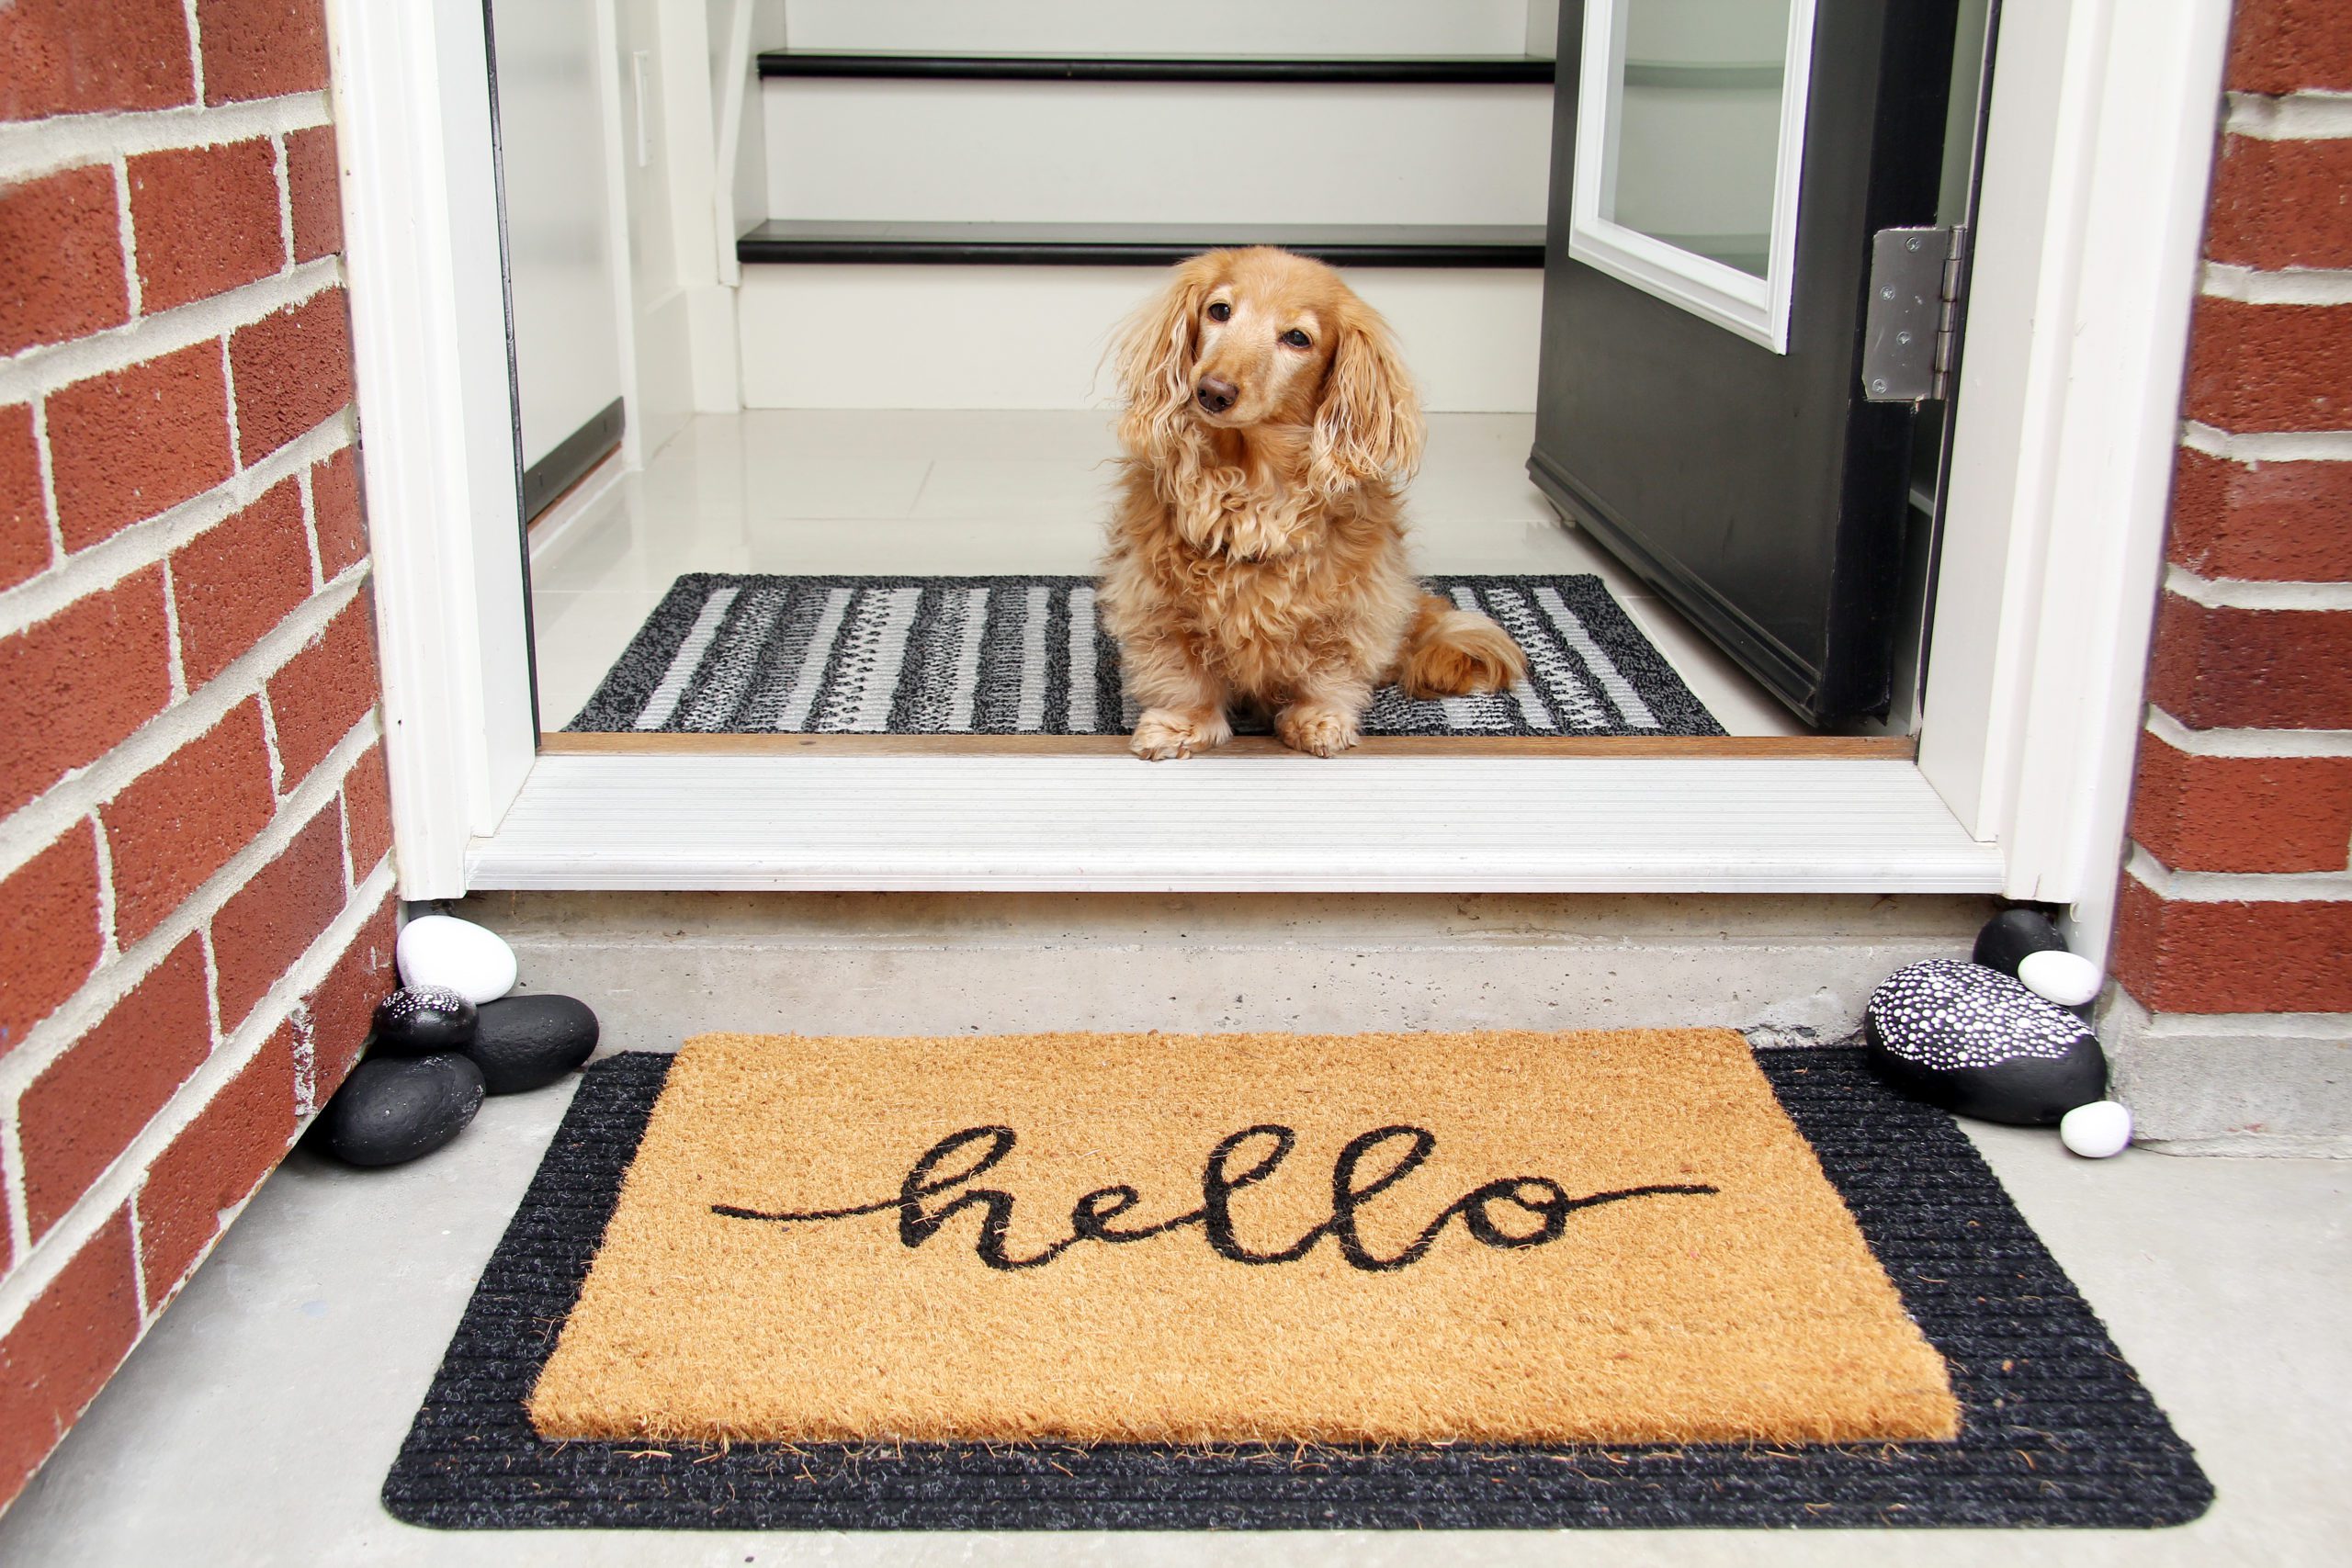 photograph of a small dog sitting in a doorway in front of a welcome mat that says "hello"